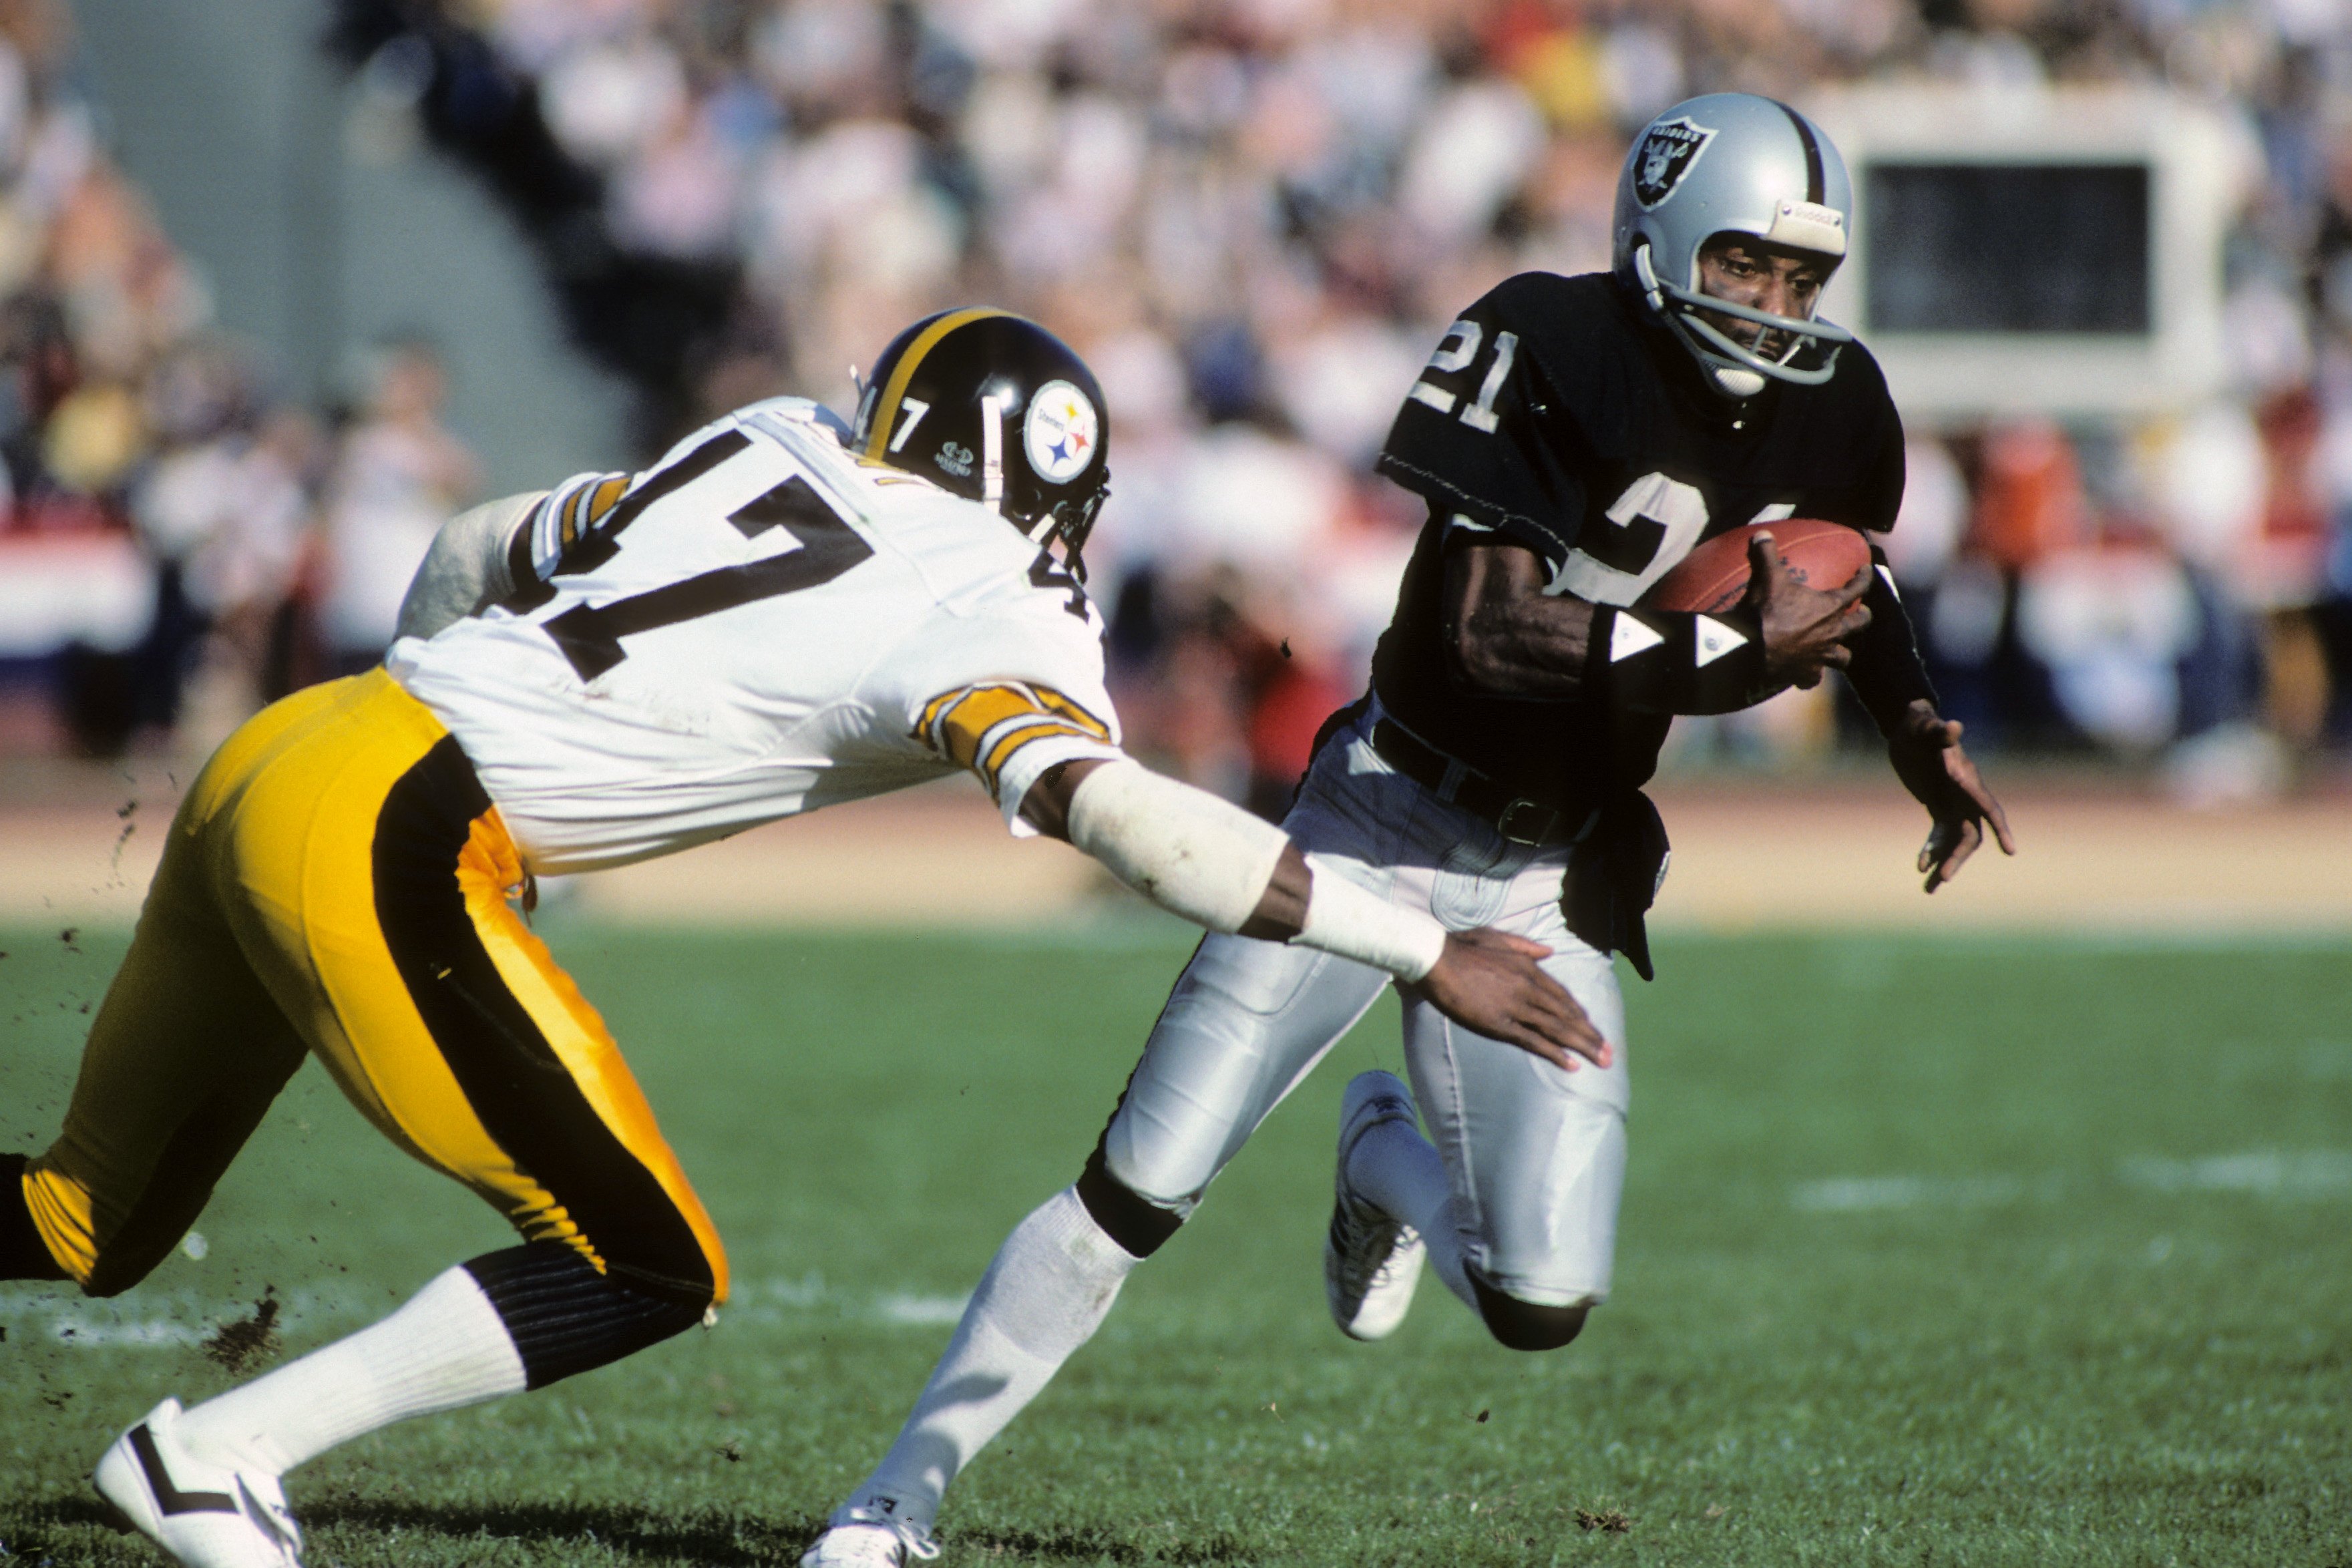 The Top 25 Fastest Players in NFL History